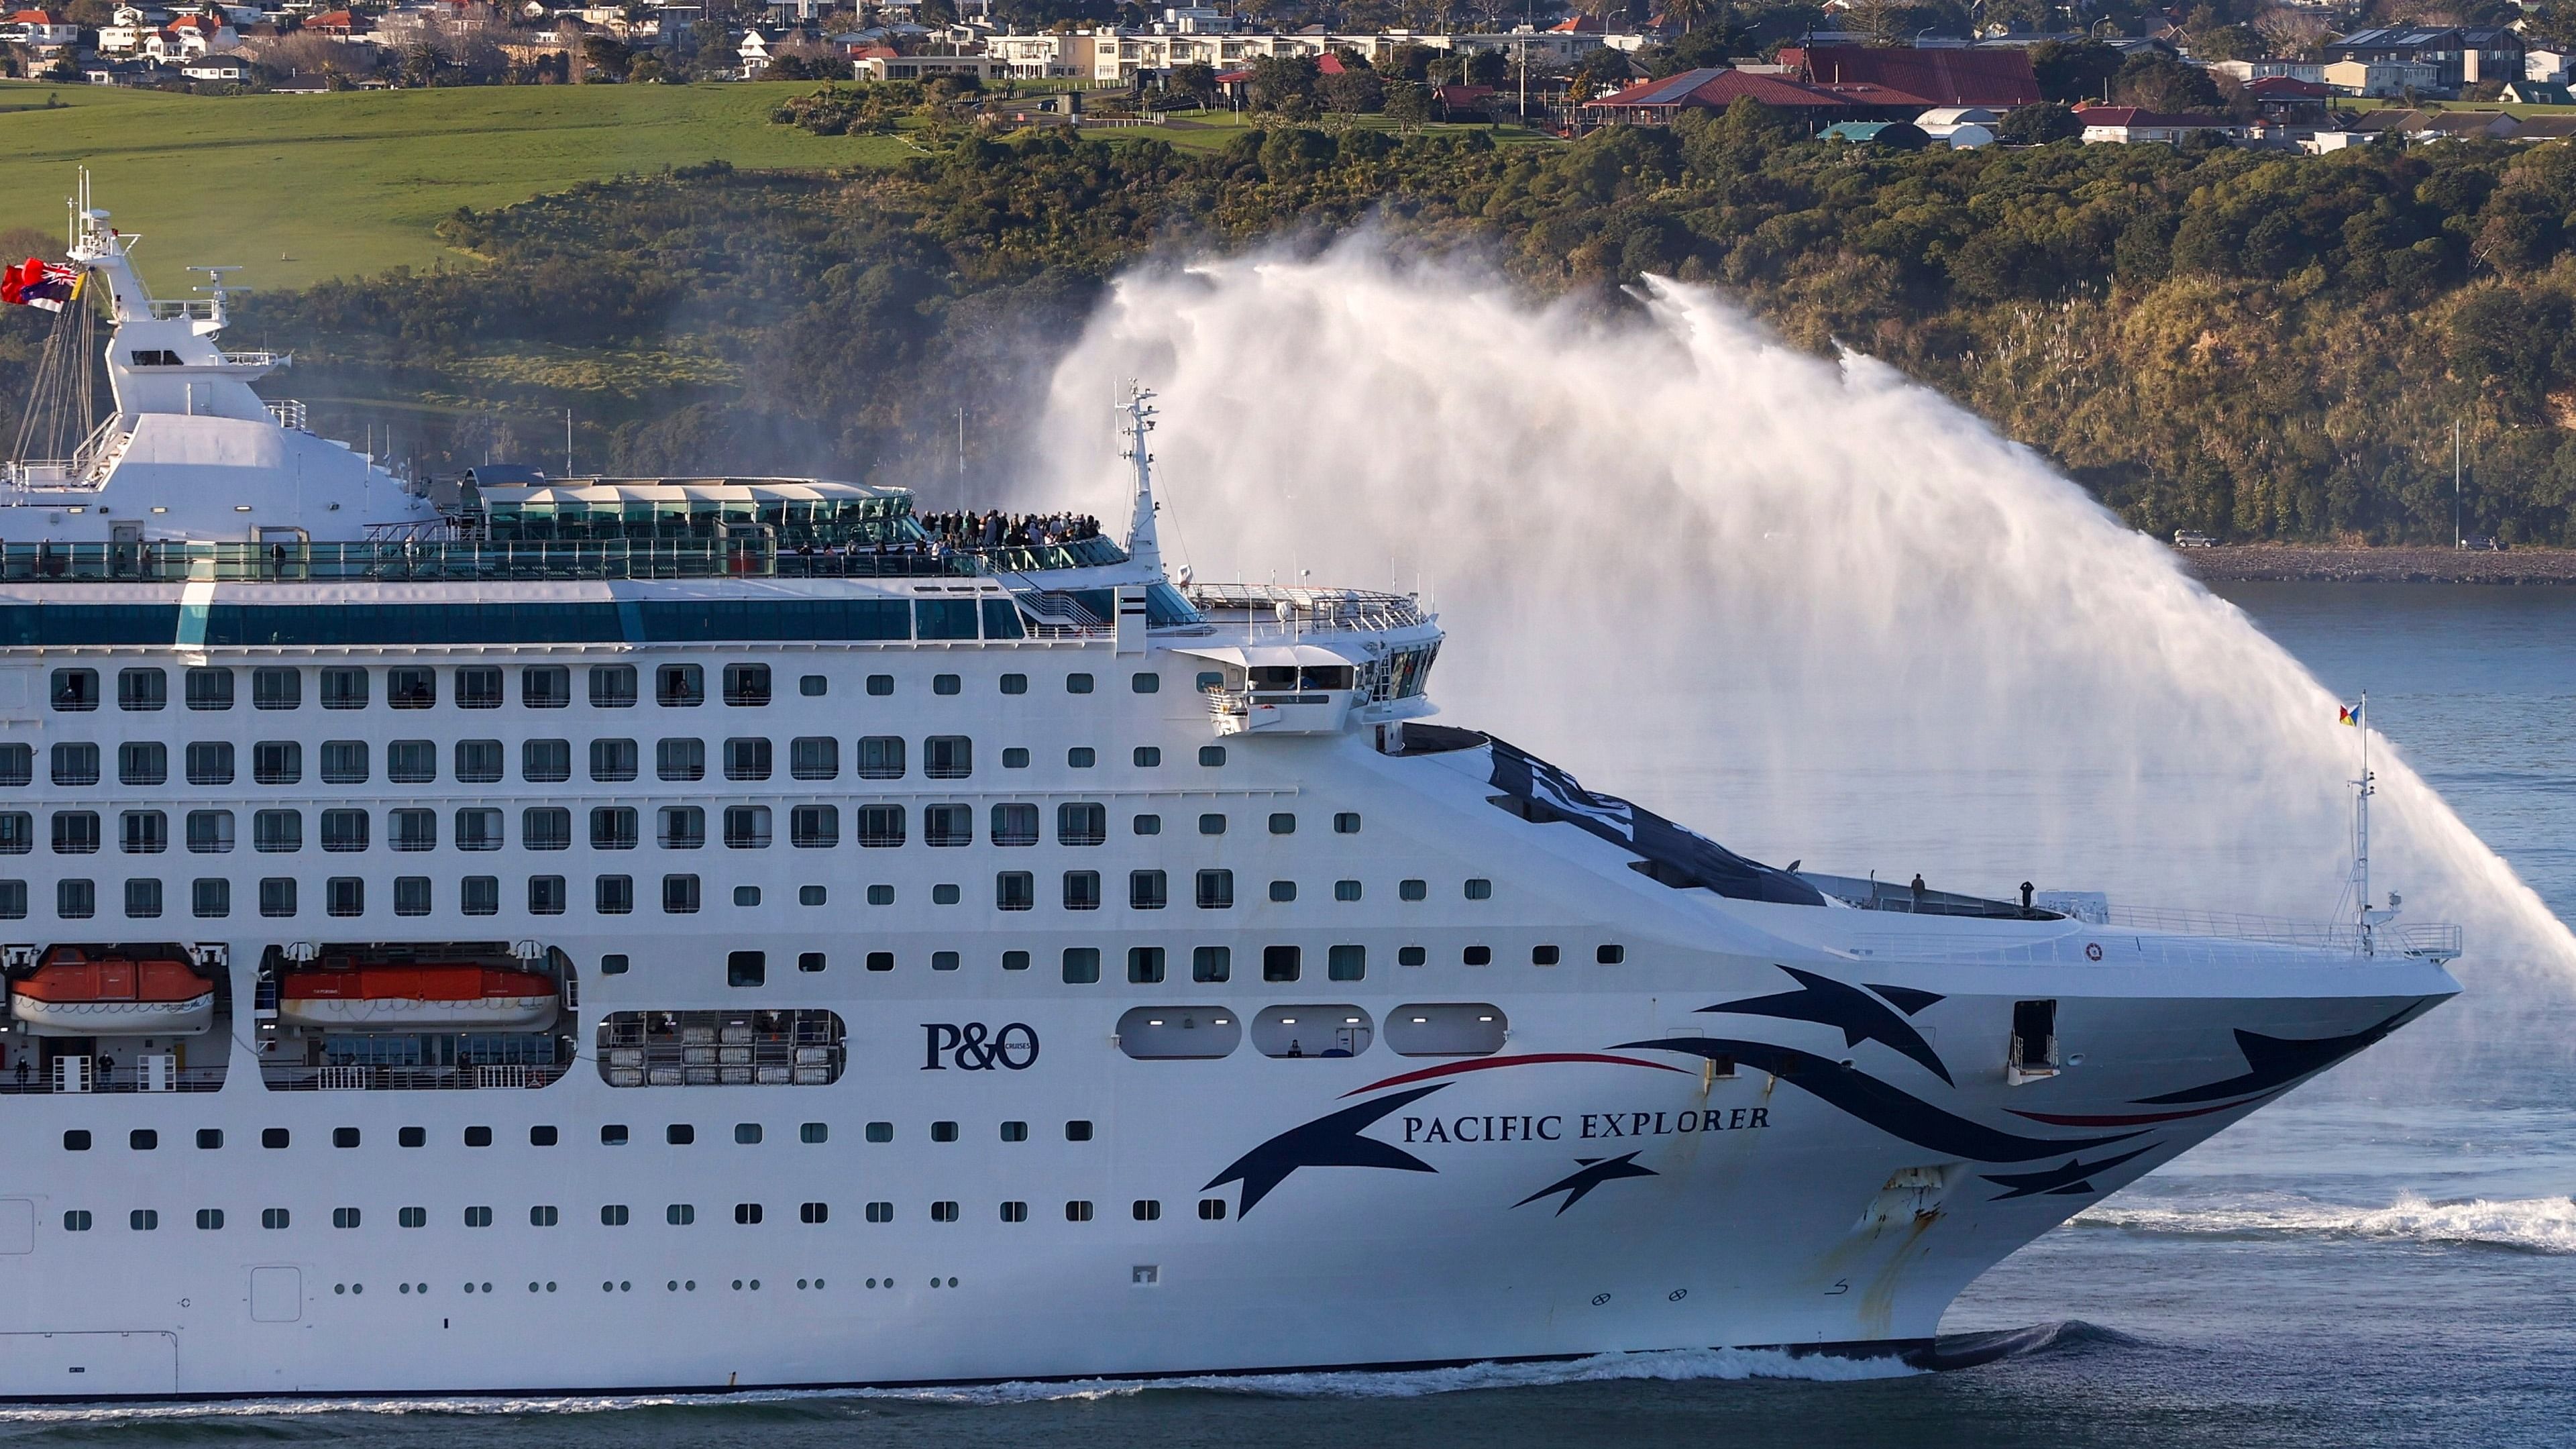 The Pacific Explorer sails into the Waitemata Harbour, in Auckland, New Zealand, Friday, Aug. 12, 2022. New Zealand has welcomed the first cruise ship to return since the coronavirus pandemic began, signaling a long-sought return to normalcy for the nation's tourism industry. Credit; AP/PTI Photo